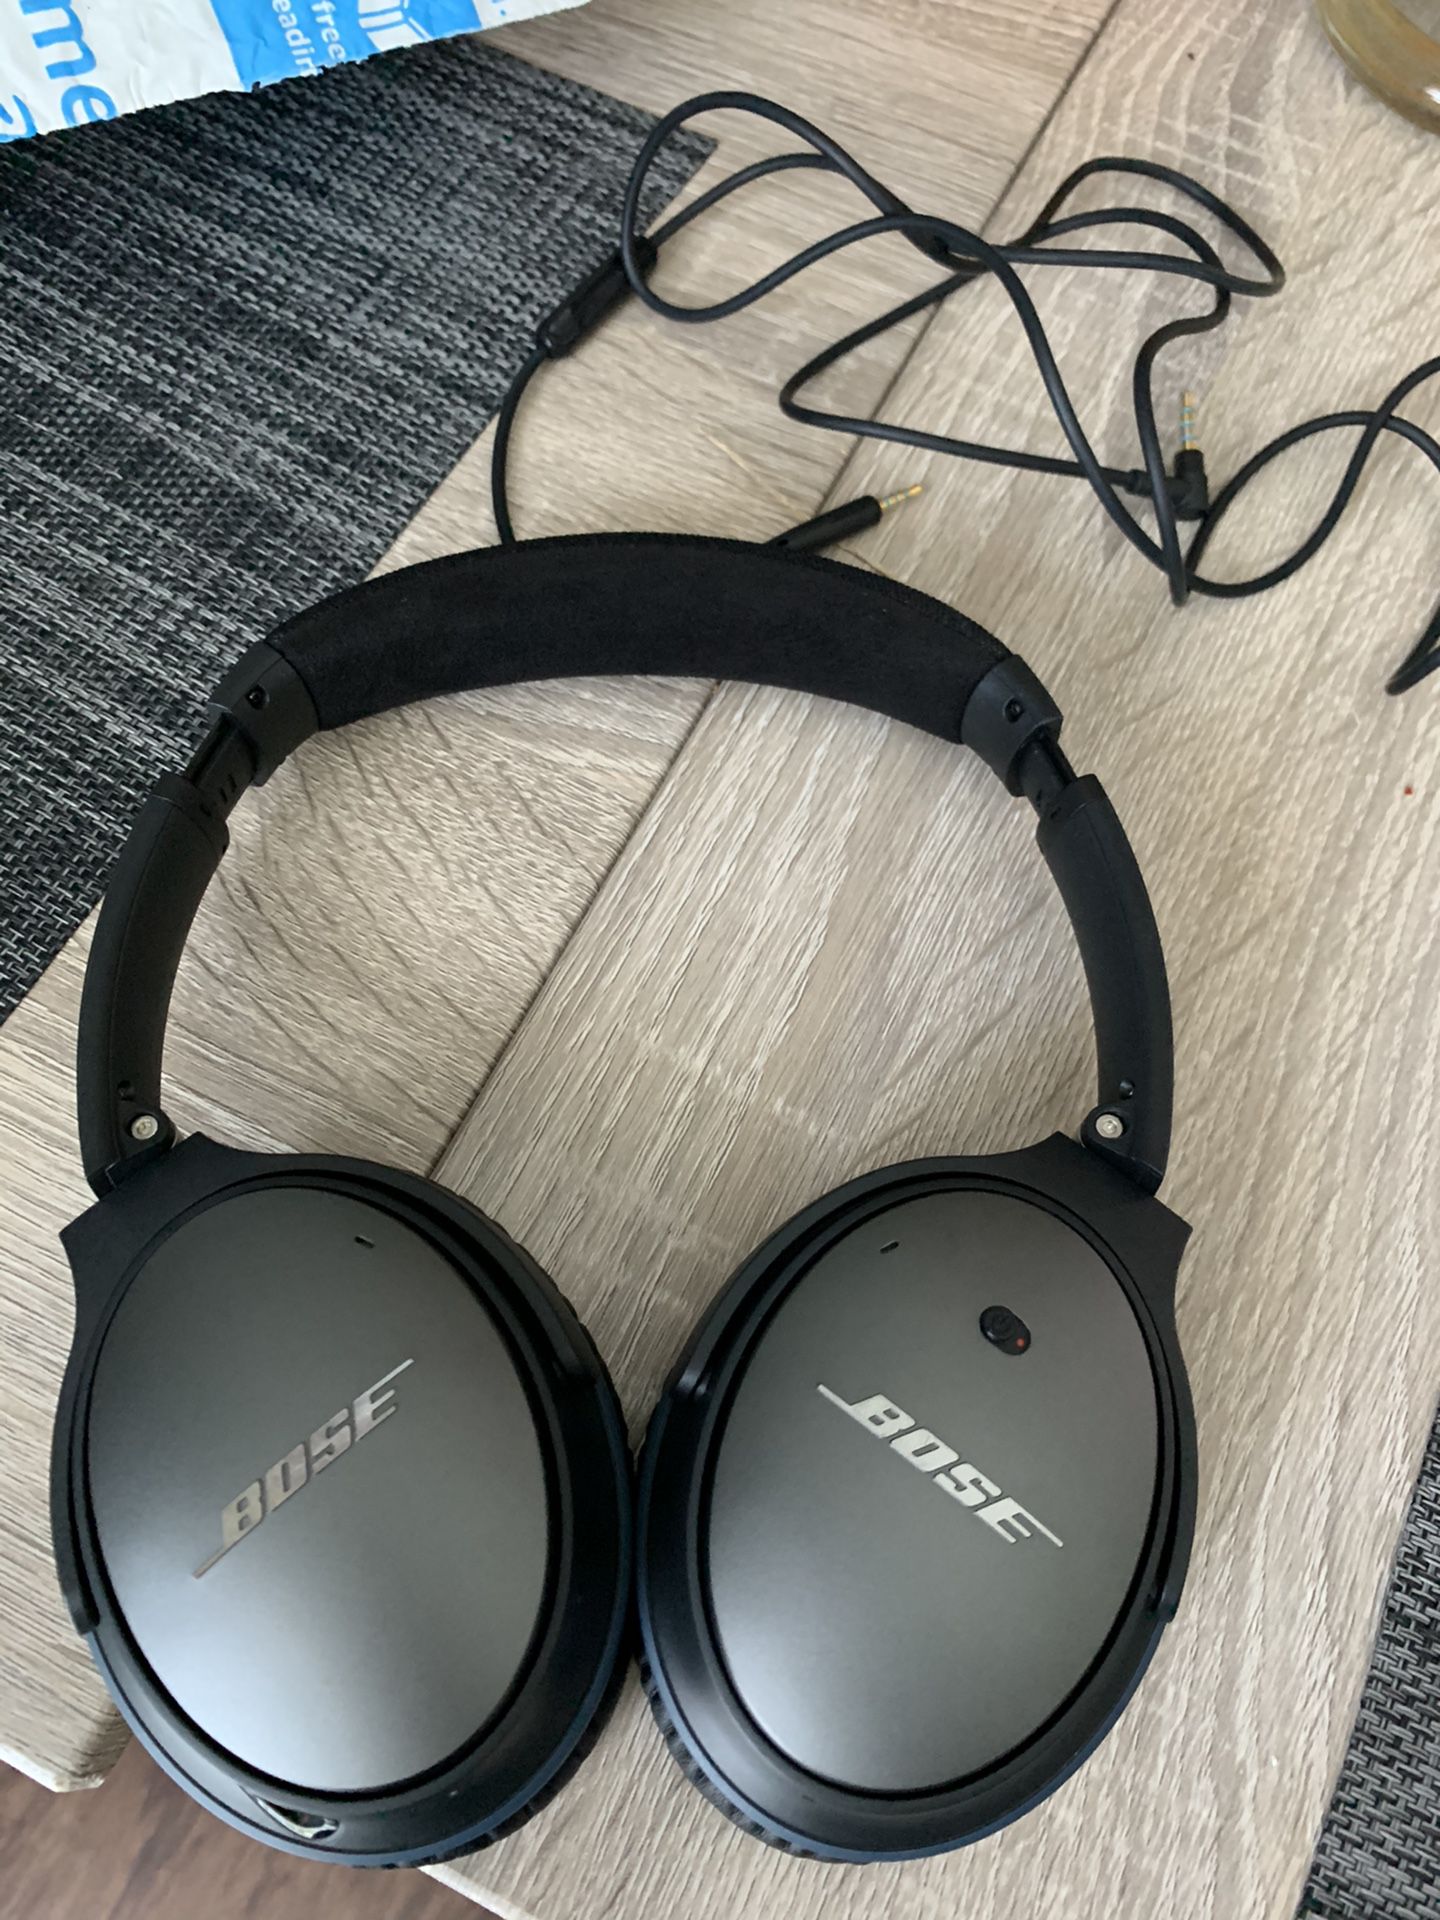 Bose noise cancellation head phones like new